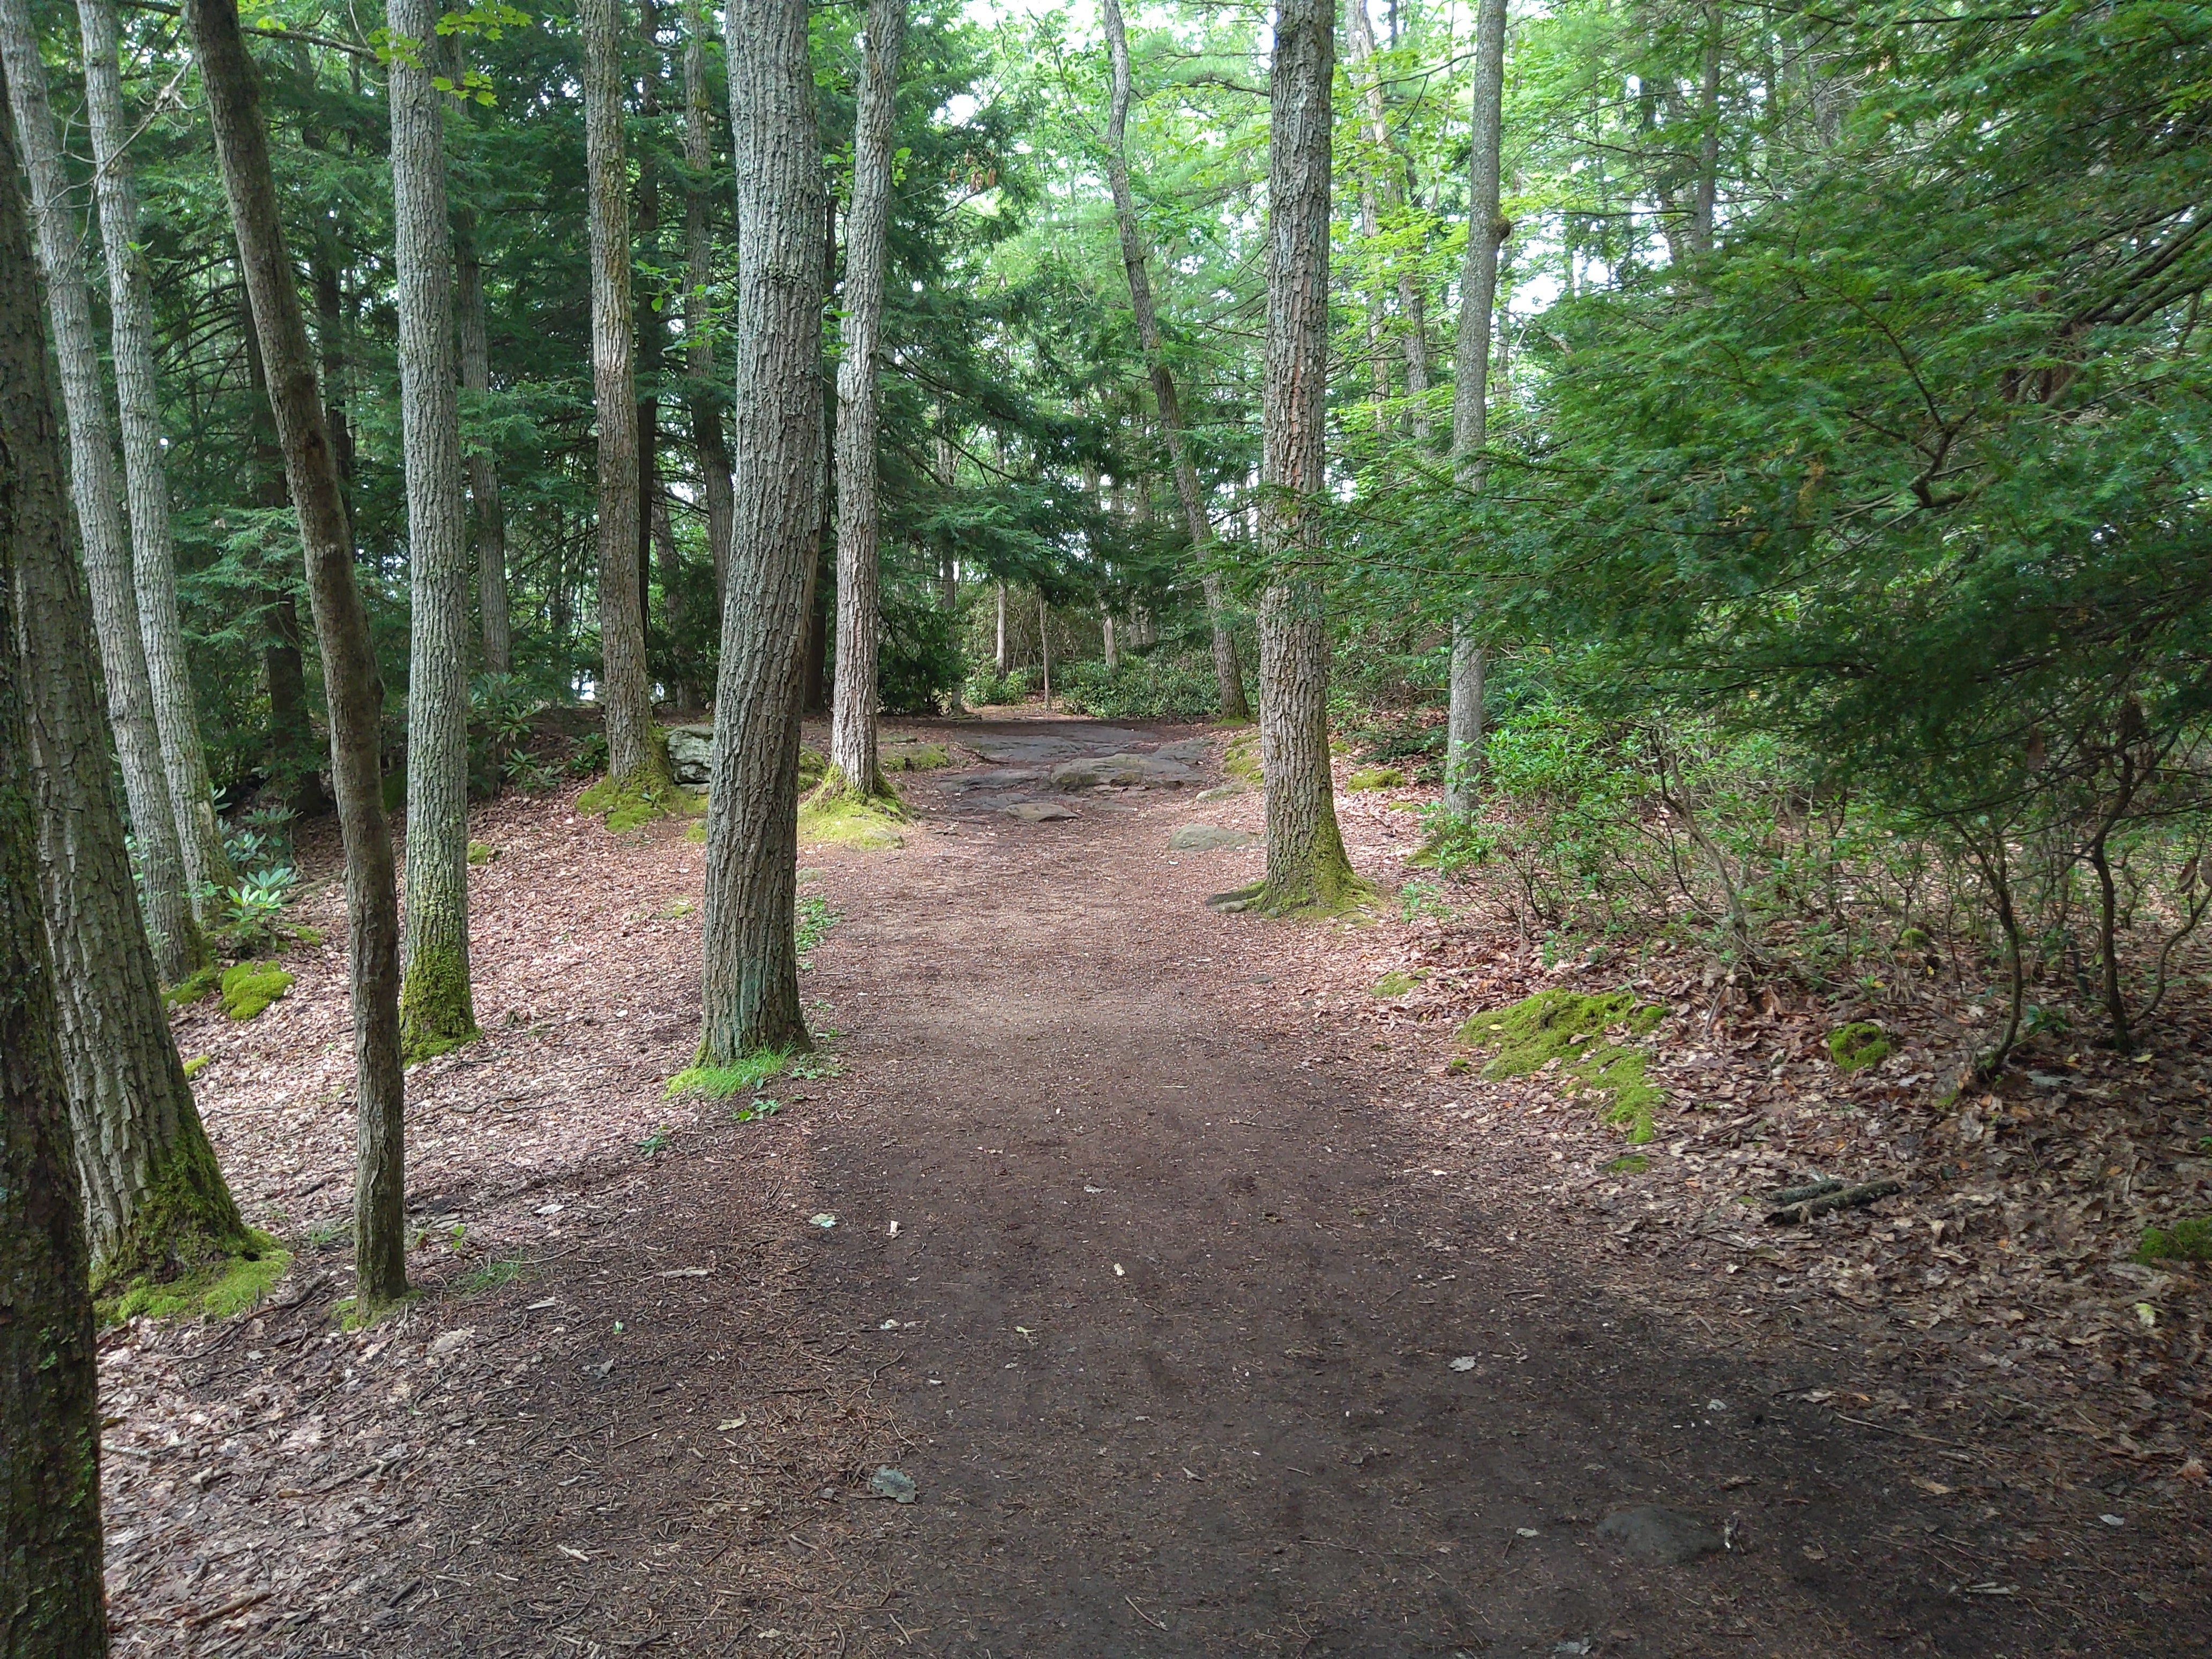 One of the many trails